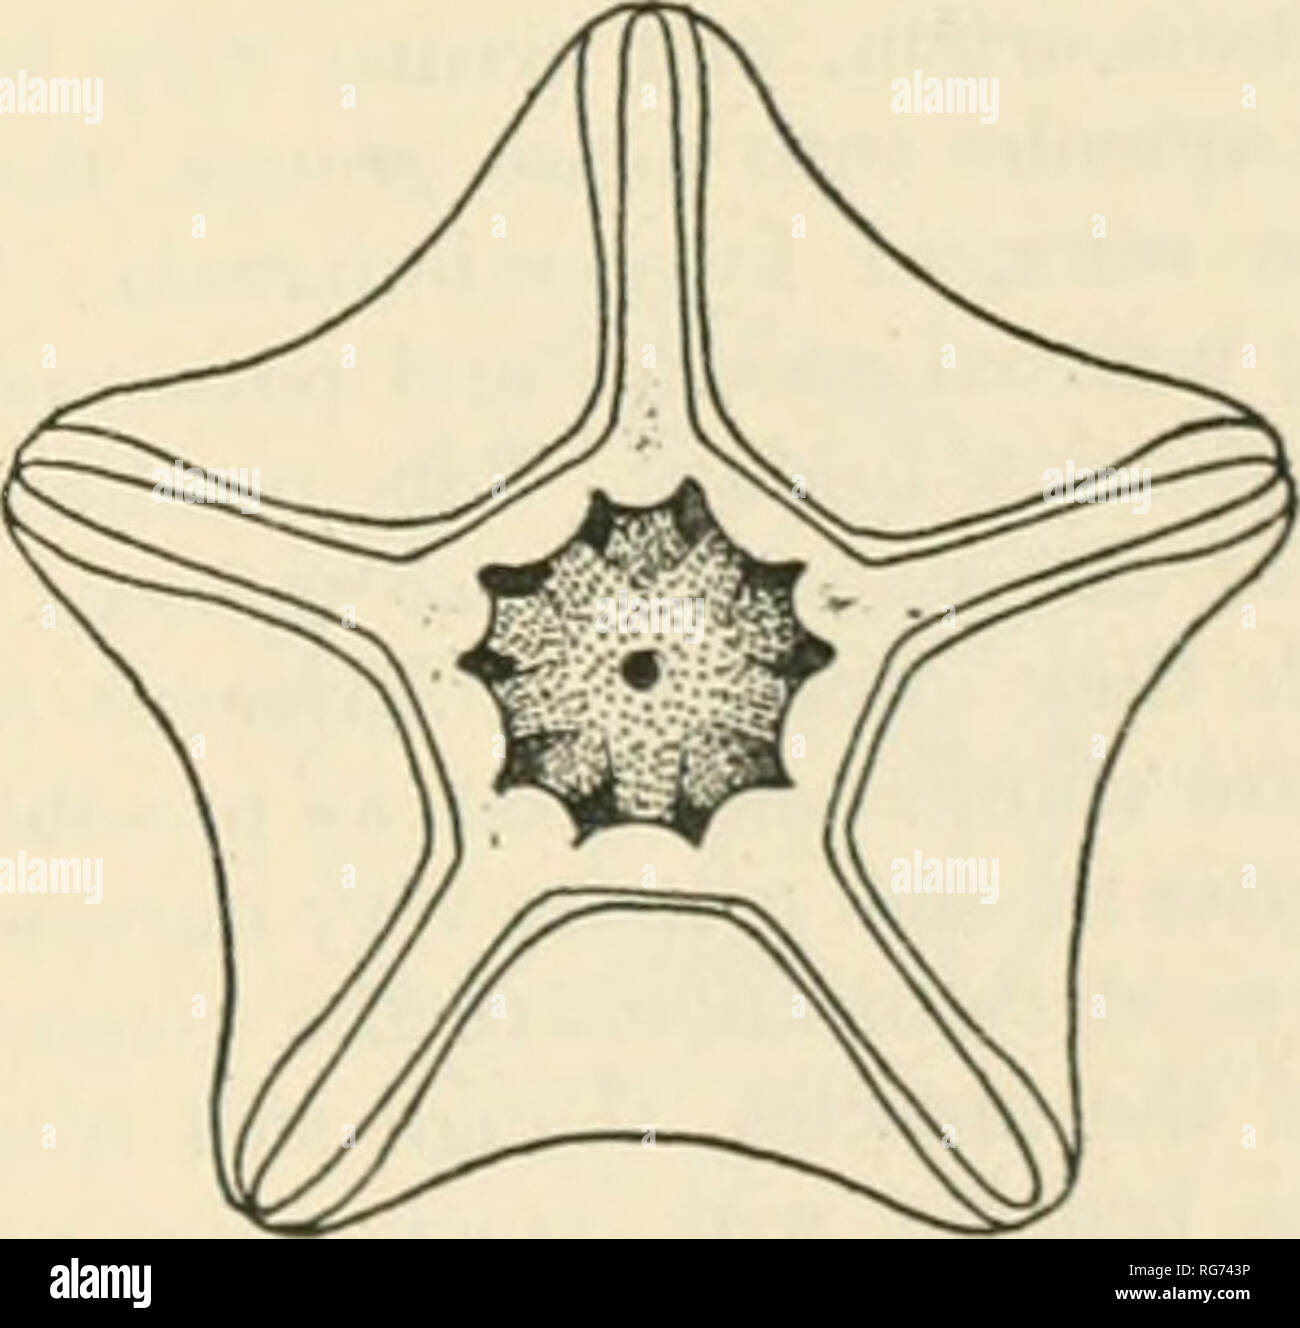 . Bulletin - United States National Museum. Science. FlO. 458. , o..x,T.rnÂ« nv A SPEaMEN OF COMATIUA IRIDOMETRIFORMI.S FROM THE BAHAMA Flos. 453-458.-453, DORSAL VIEW OFTHERAmALPENTAOONOFA.PECIÂ«EN^ CoM.VTULA PF.CTINATA FROM SLNOAPORE. 4oo, ISLANDS. 454, DOR.SAL .TEW OF THE R.^DIAL ^'^â 'ZllZZÂ« KTvS^OL^K,. ( .rTZK V. H. CARPENTER). 45(-â POP-SAL VIEW DORSAL^^EWOFT^ERADL.LPENTAGONOFASPEaMENOFCoÂ«ATU^^^^^^^^ CARPENTER). 457. DORSAL ^â¢IEW OF THE. Please note that these images are extracted from scanned page images that may have been digitally enhanced for readability - coloration and appearanc Stock Photo